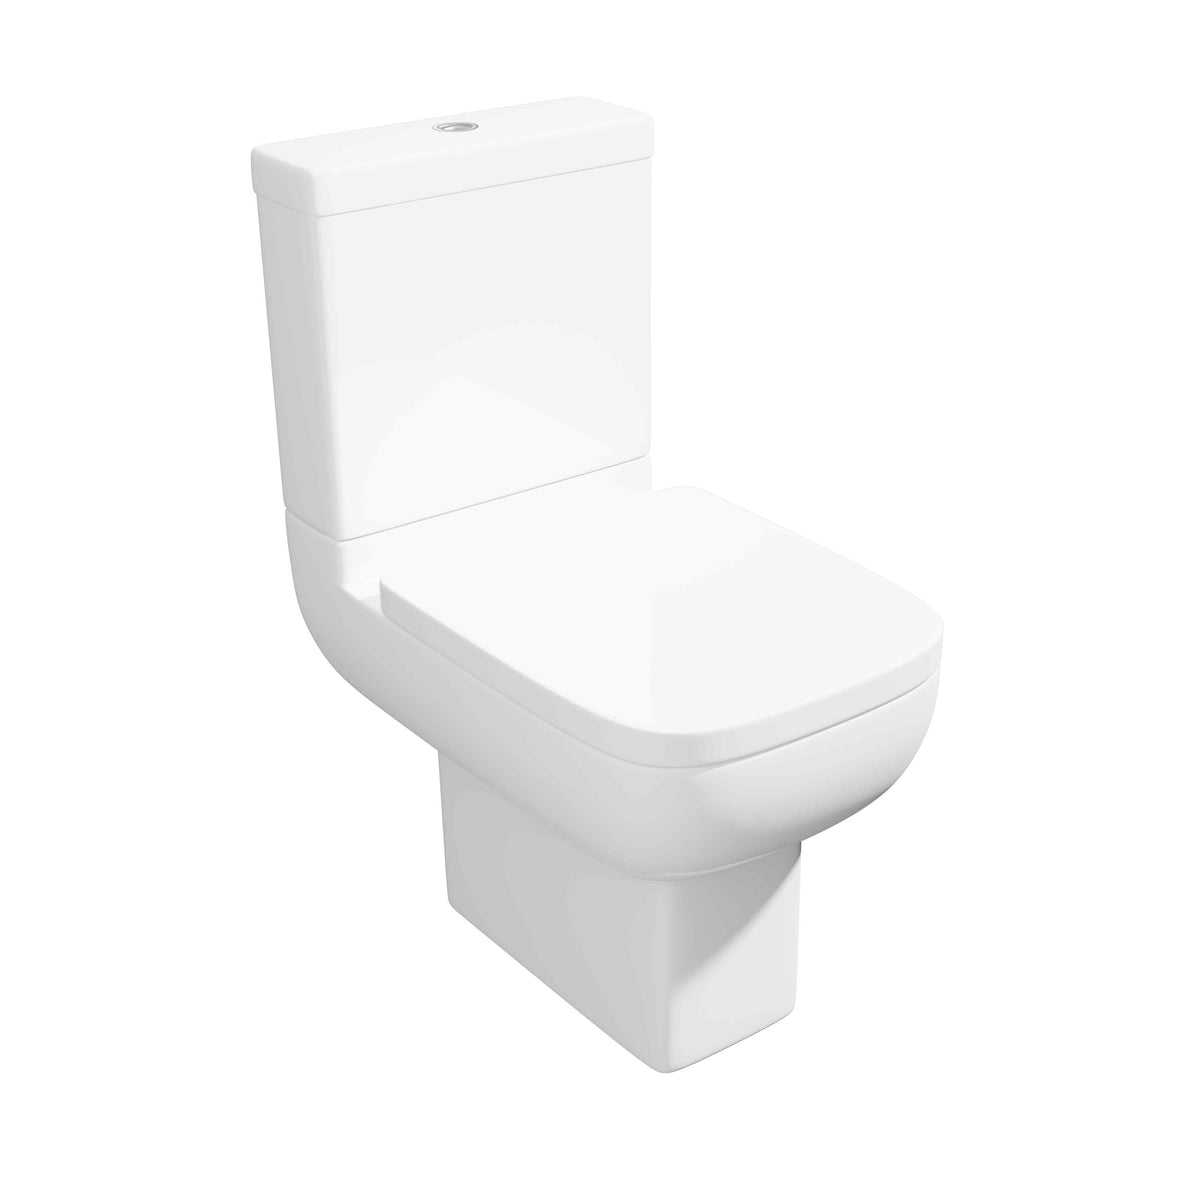 Browse Options 600 Close Coupled Toilets & Basins at B&Q for Cloakroom Solutions